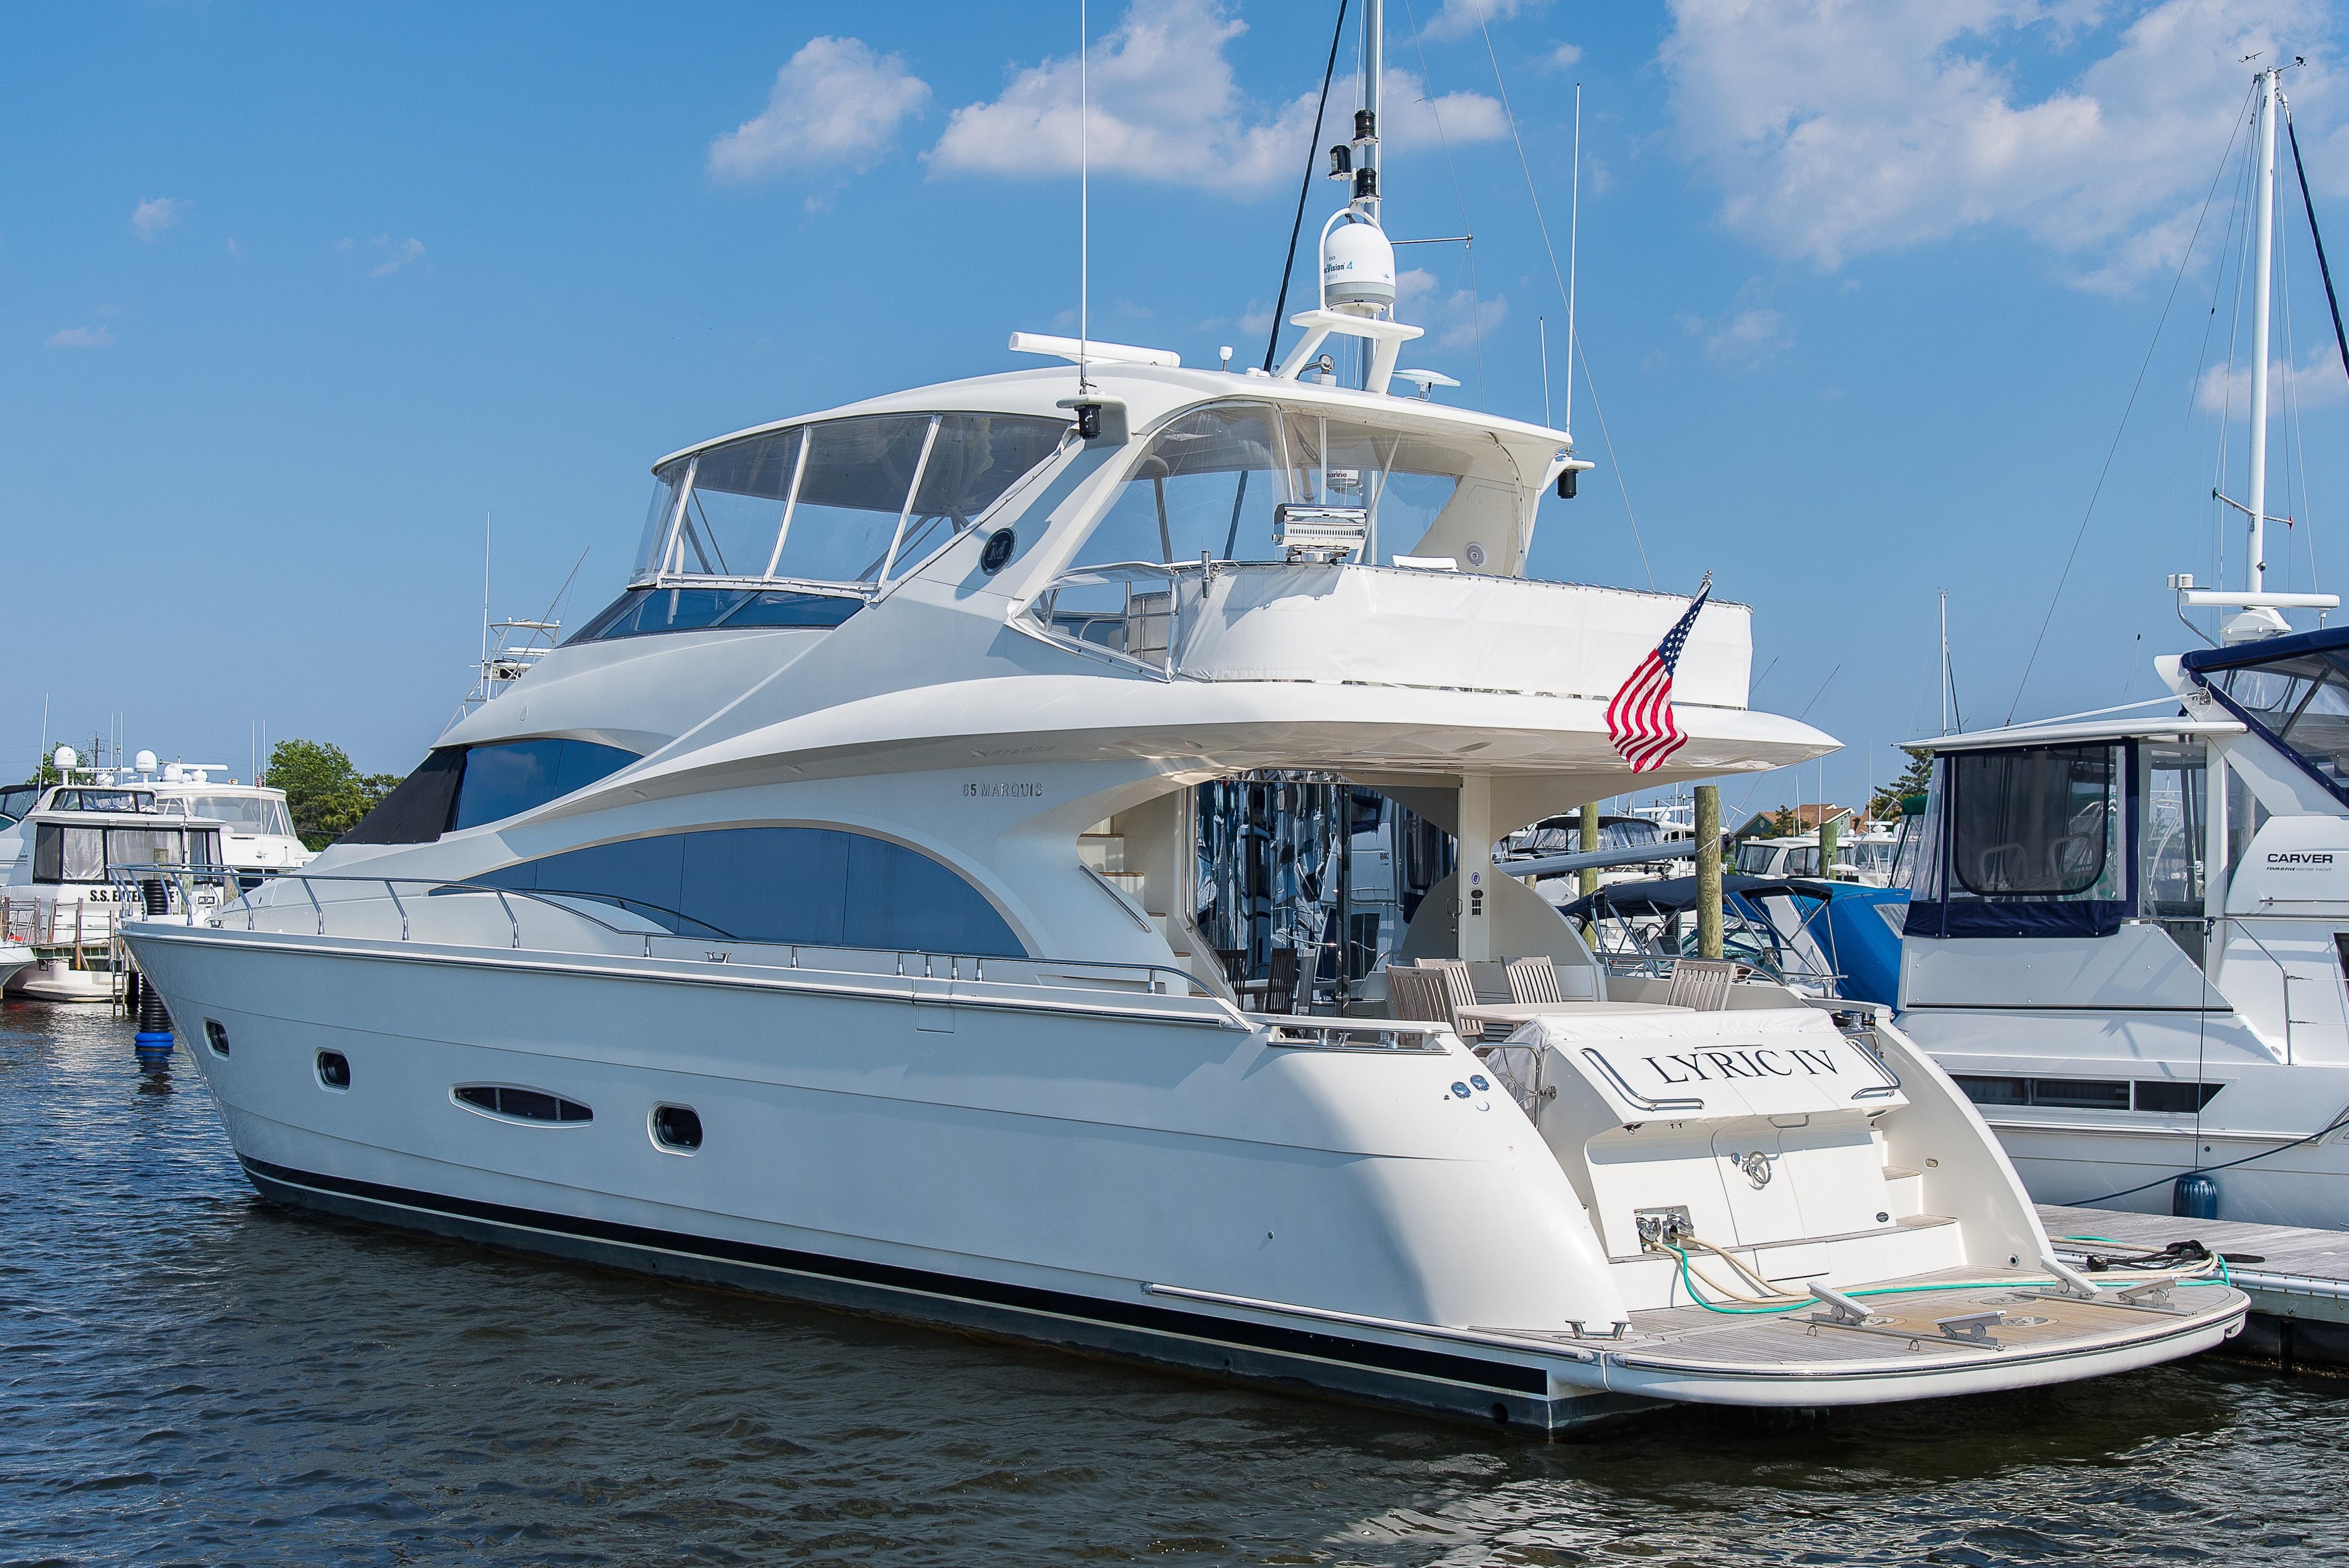 65 foot used yacht for sale